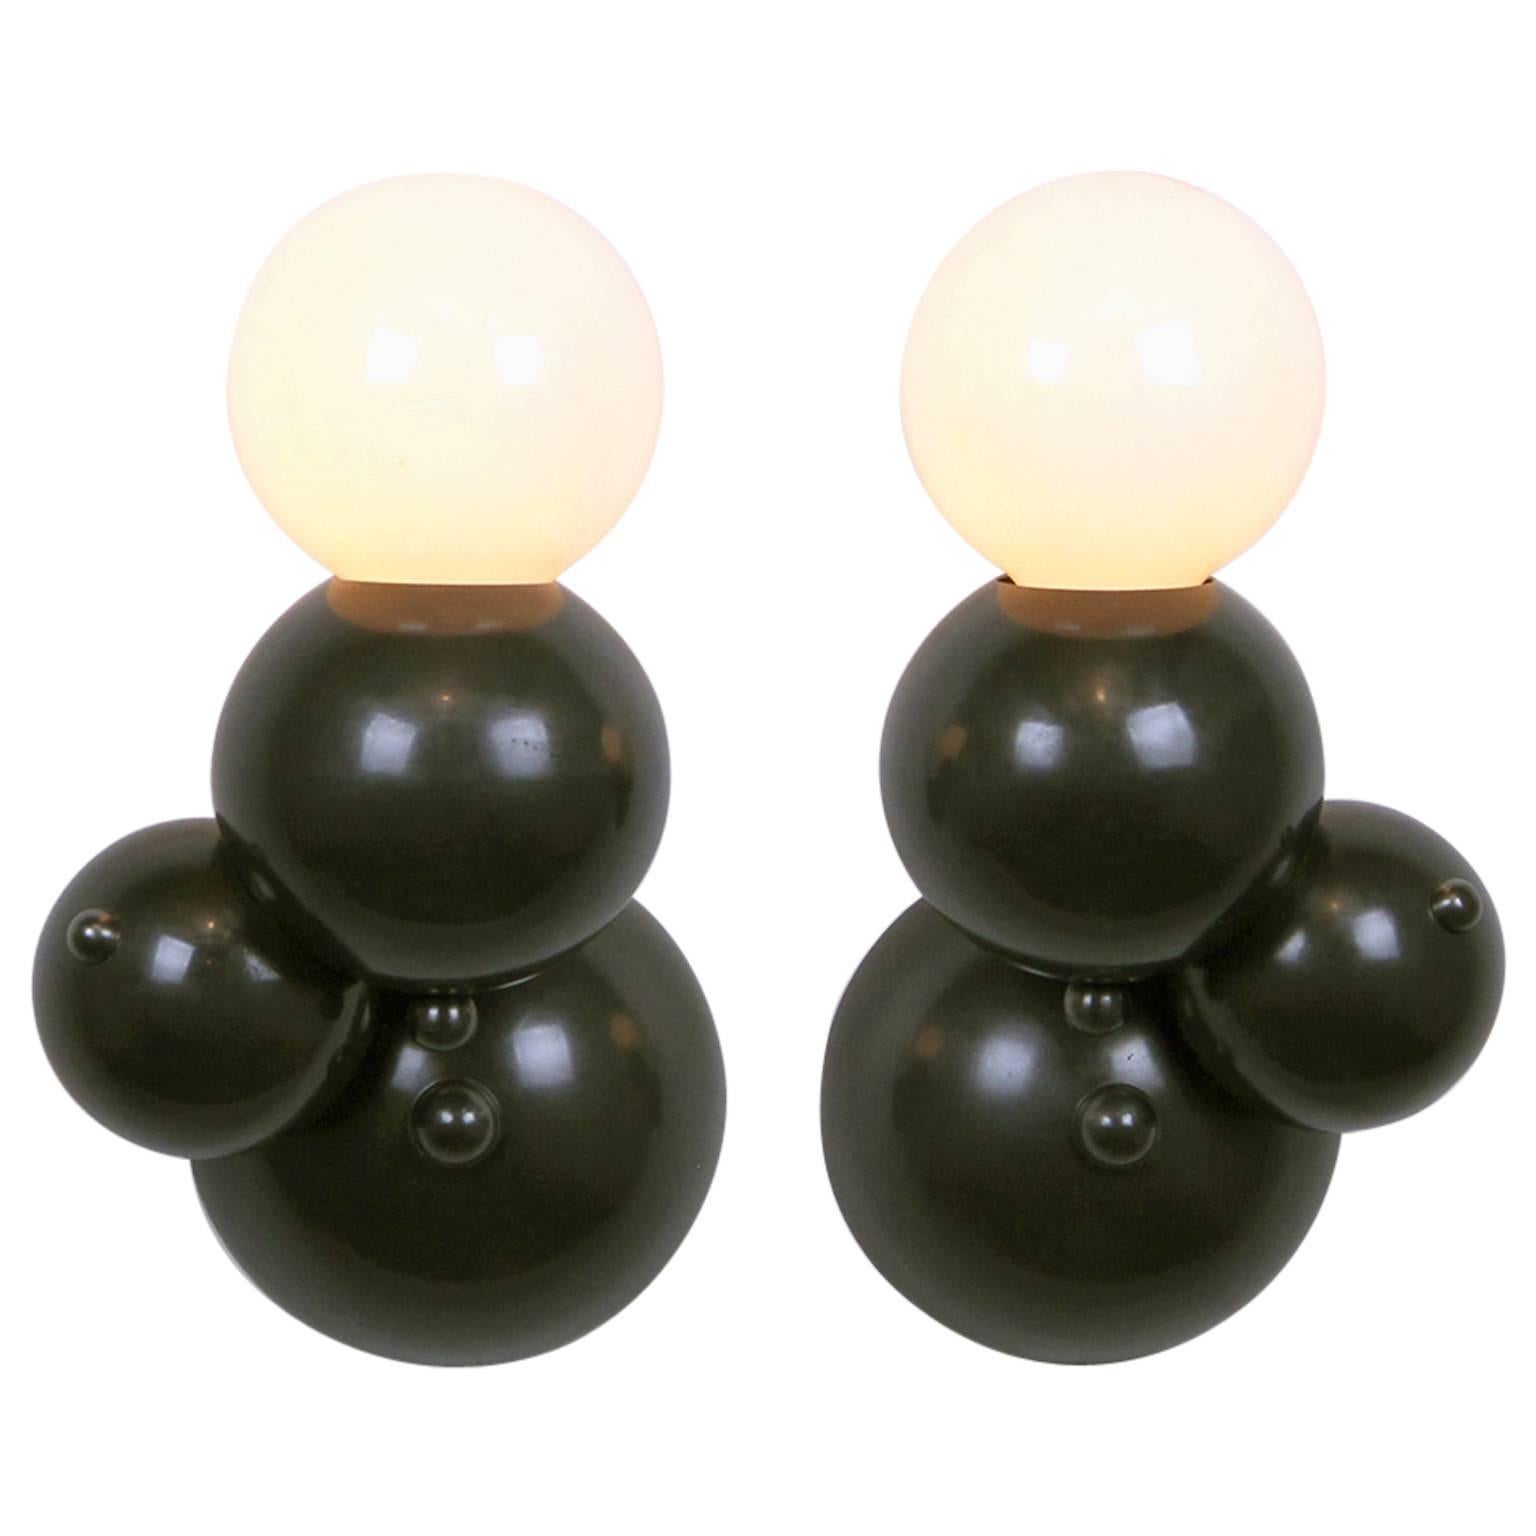 Bubbly 01-Light Wall, Modern Molecule Sculptural Sconce, Oil-Rubbed Bronze, Pair